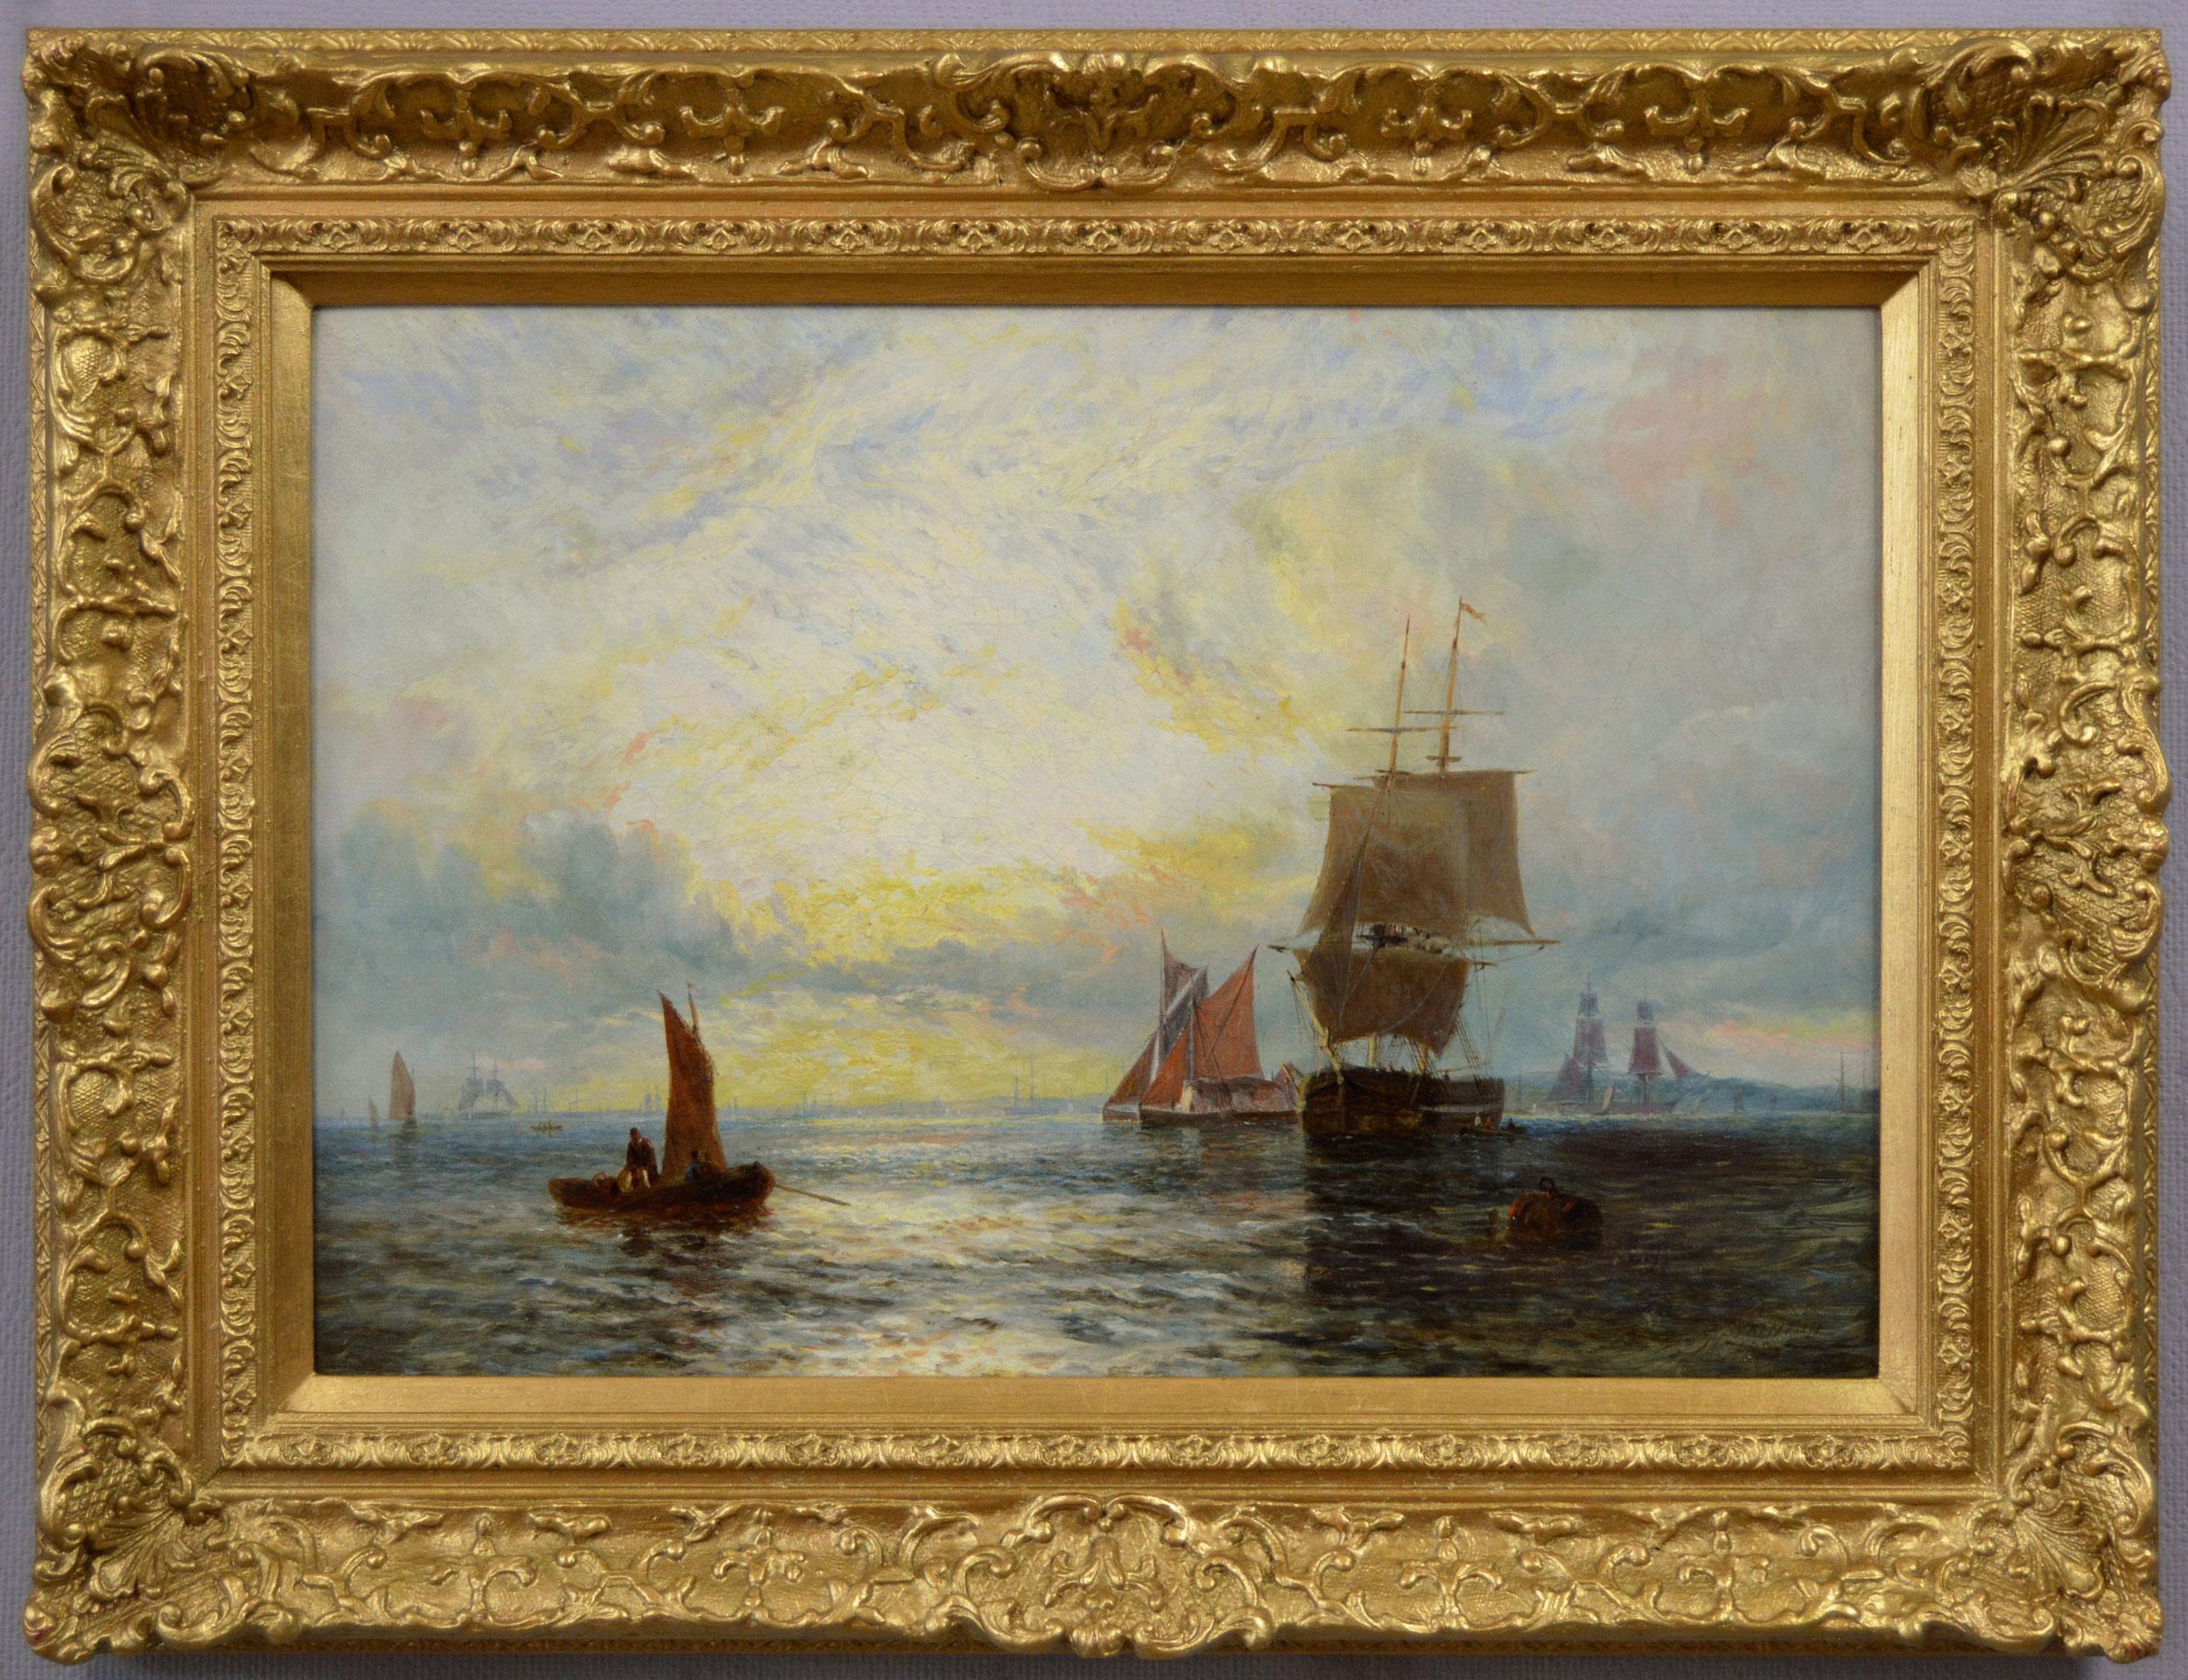 George Stainton Landscape Painting - 19th Century seascape oil painting of ships on the Thames